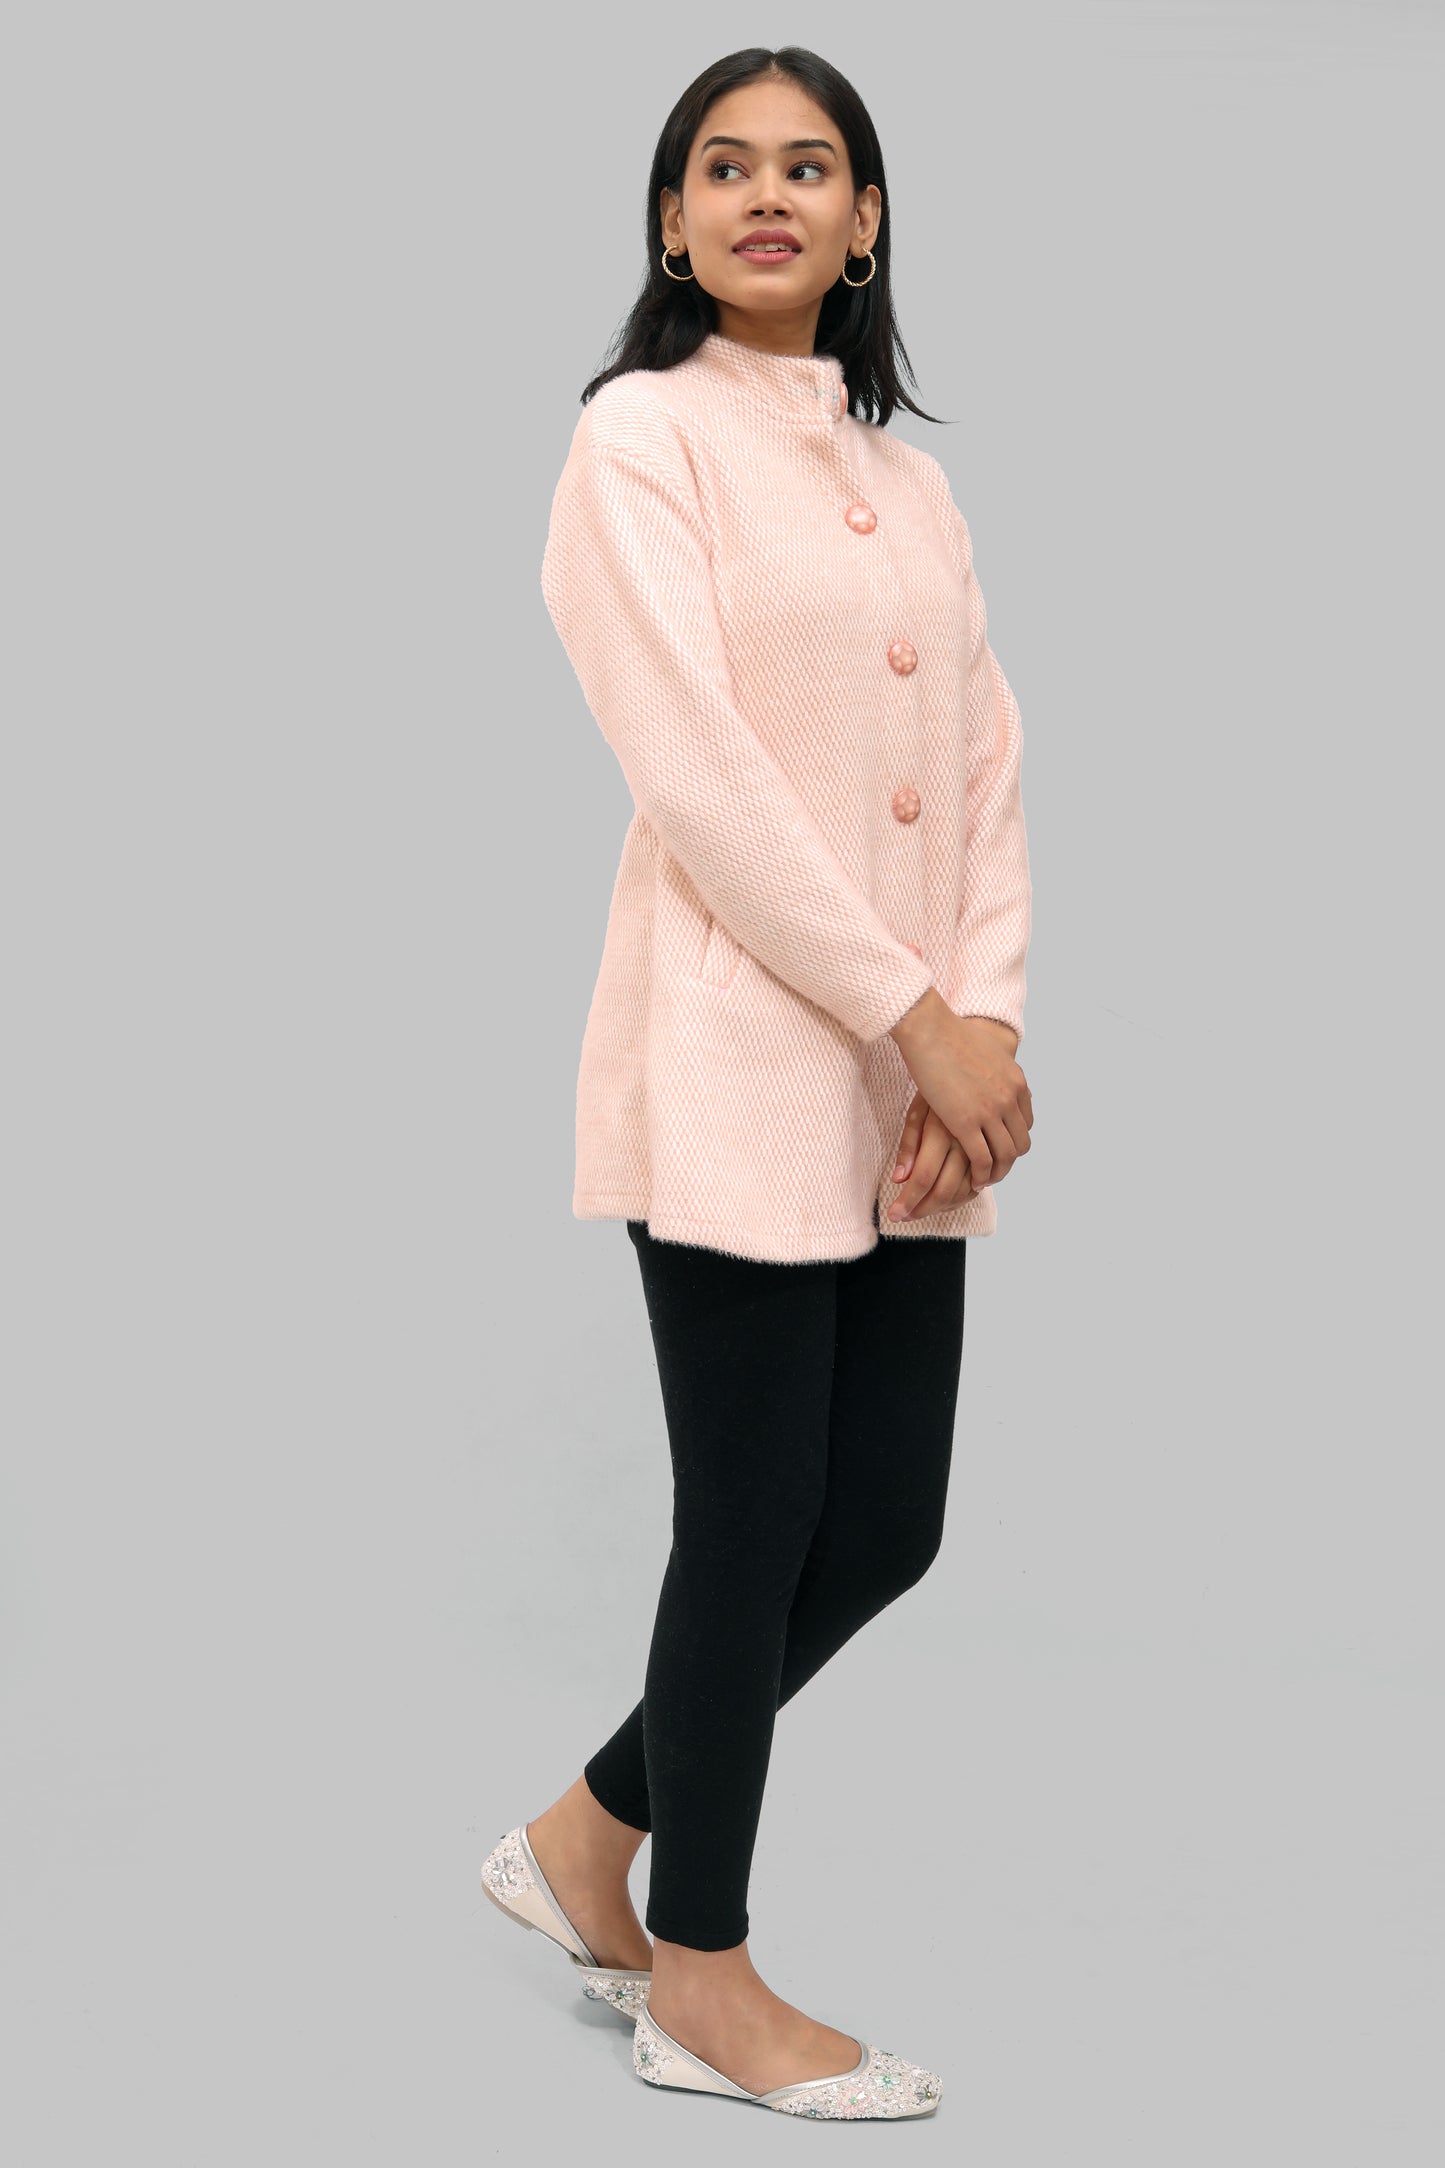 Ada Fashions Light Peach and White Wool Coat With Side Pocket